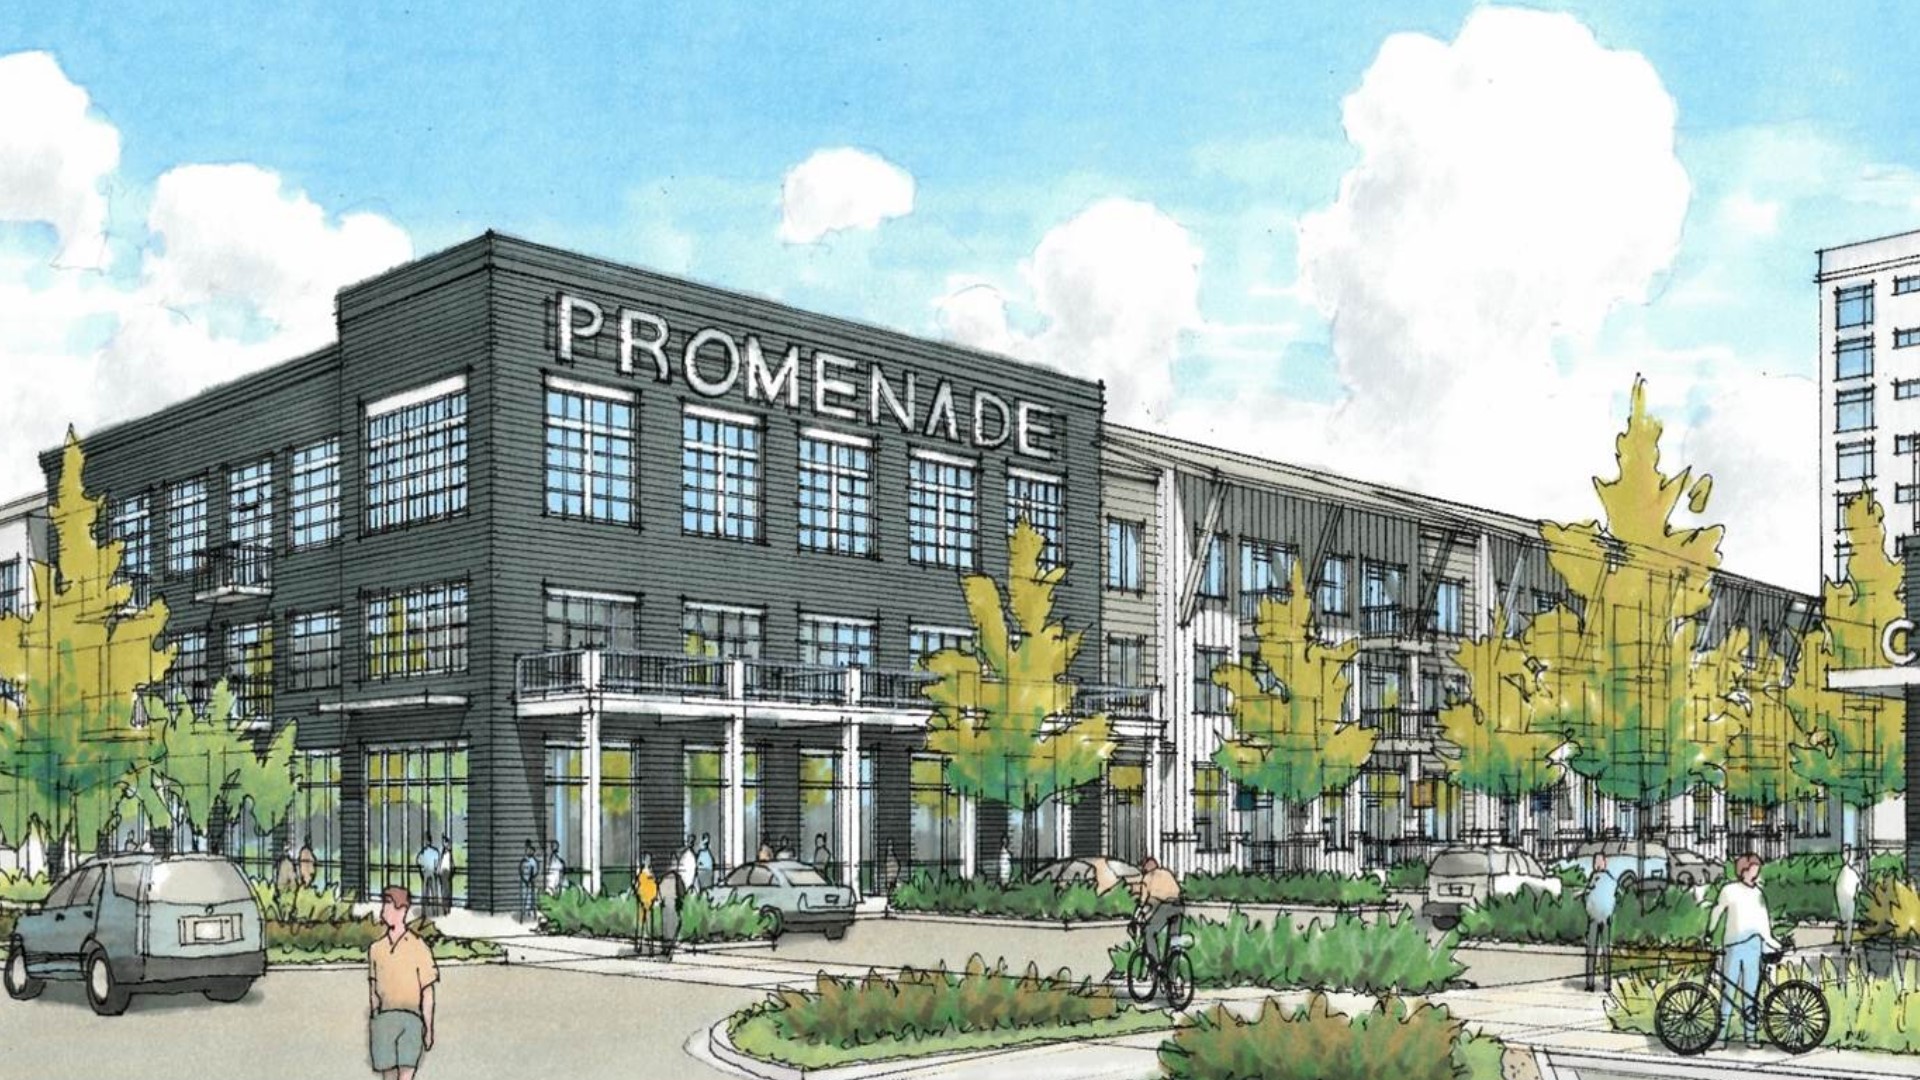 On Monday, dozens of Waco residents spoke with the developer about public spaces in the Promenade.